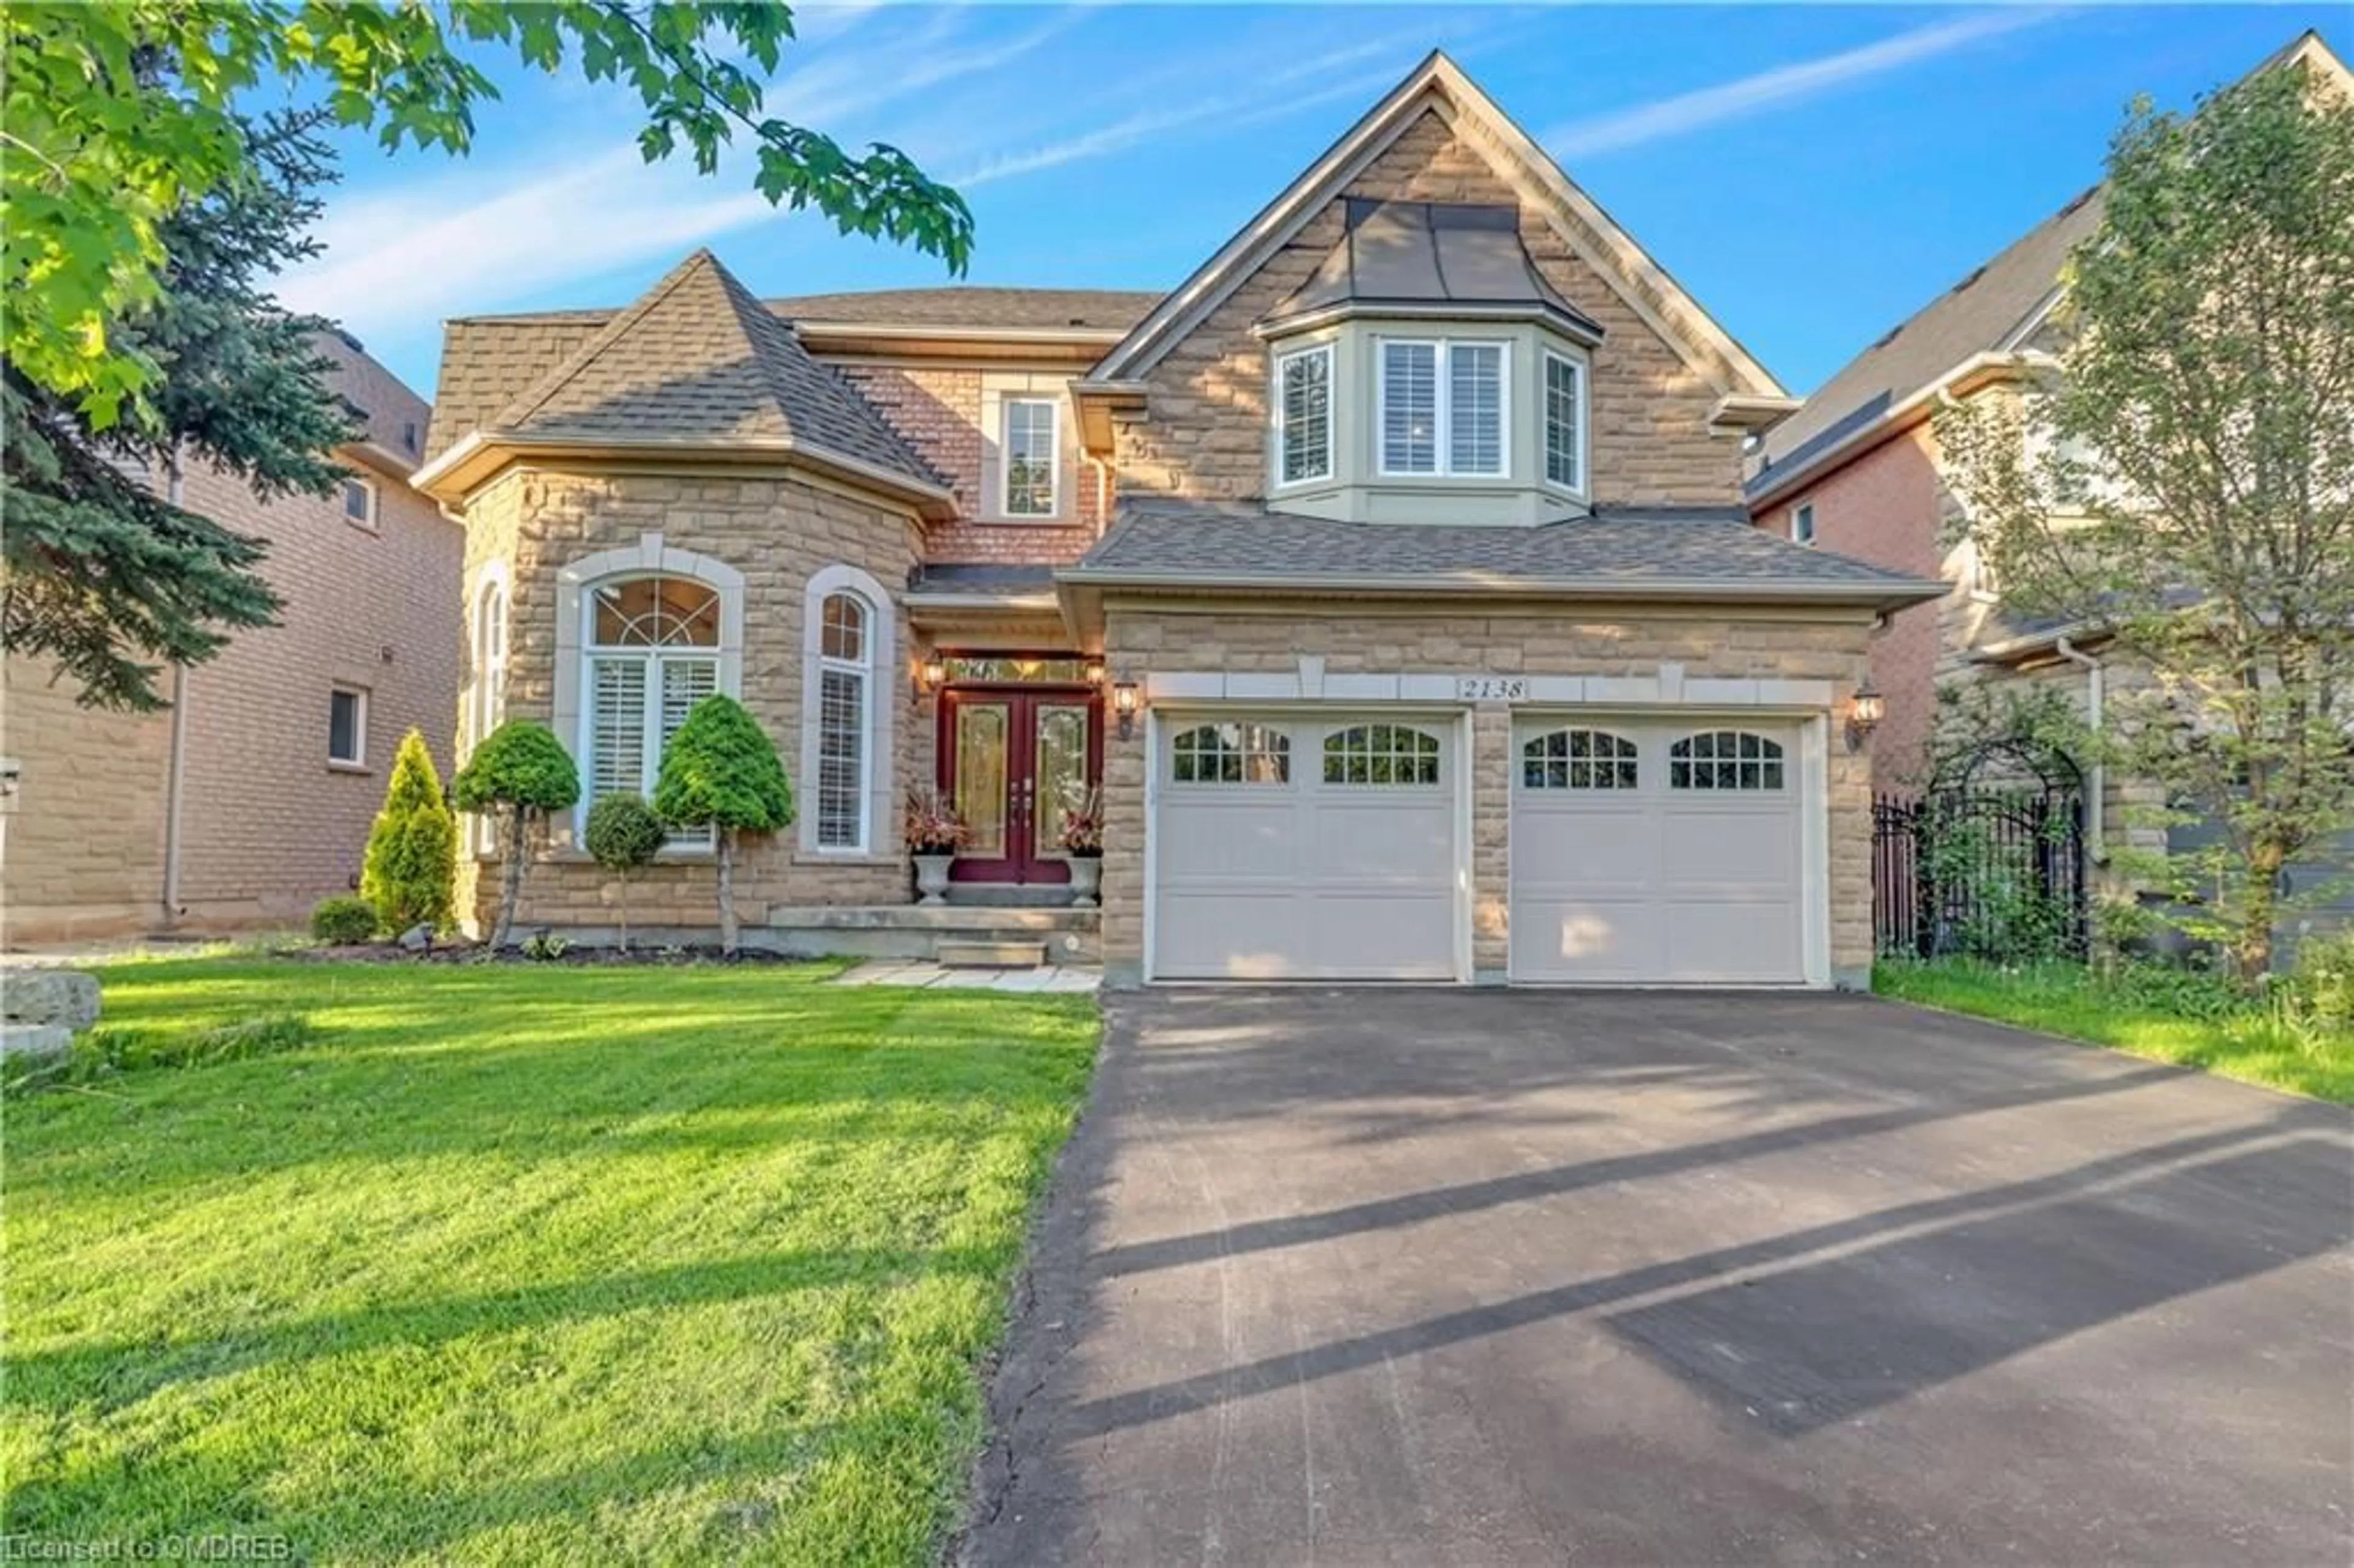 Home with brick exterior material for 2138 Alderbrook Dr, Oakville Ontario L6M 4Z2